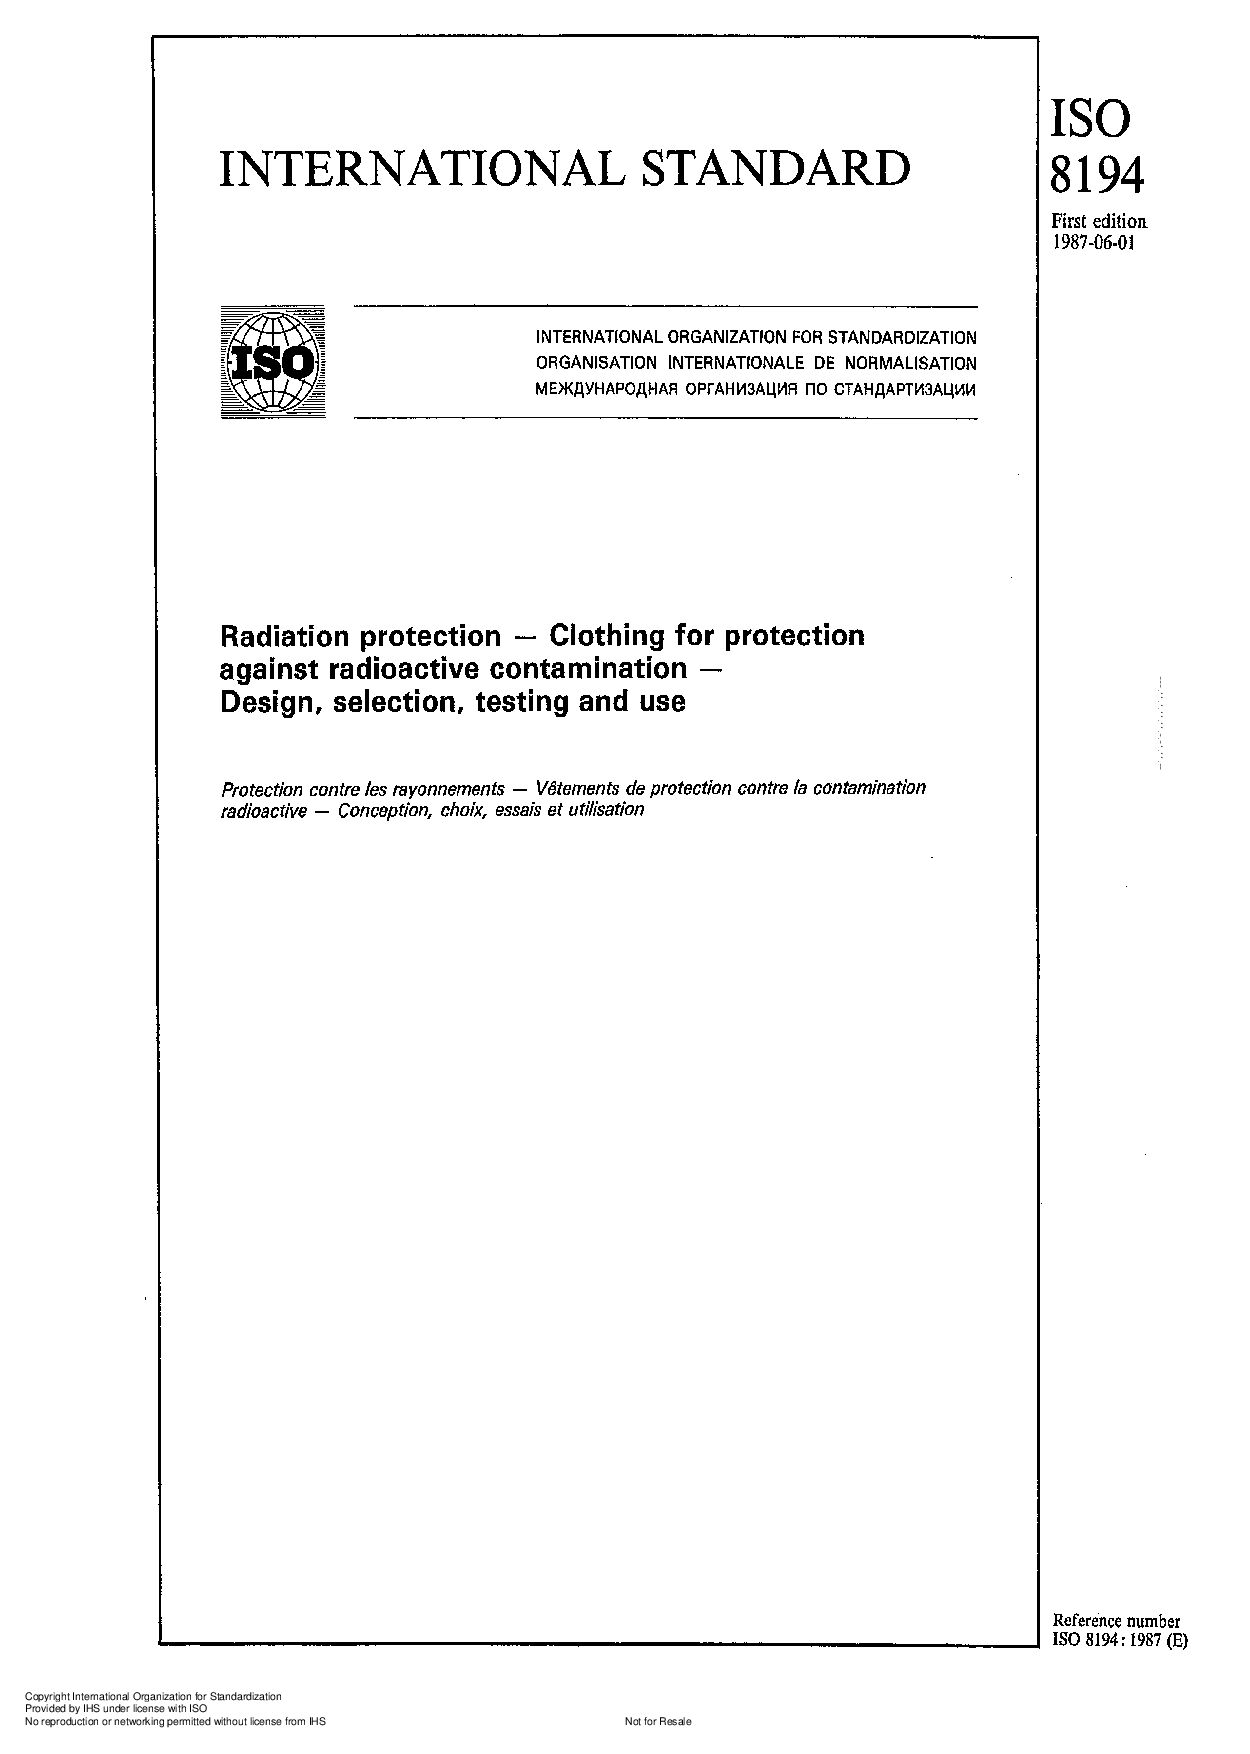 ISO 8194:1987